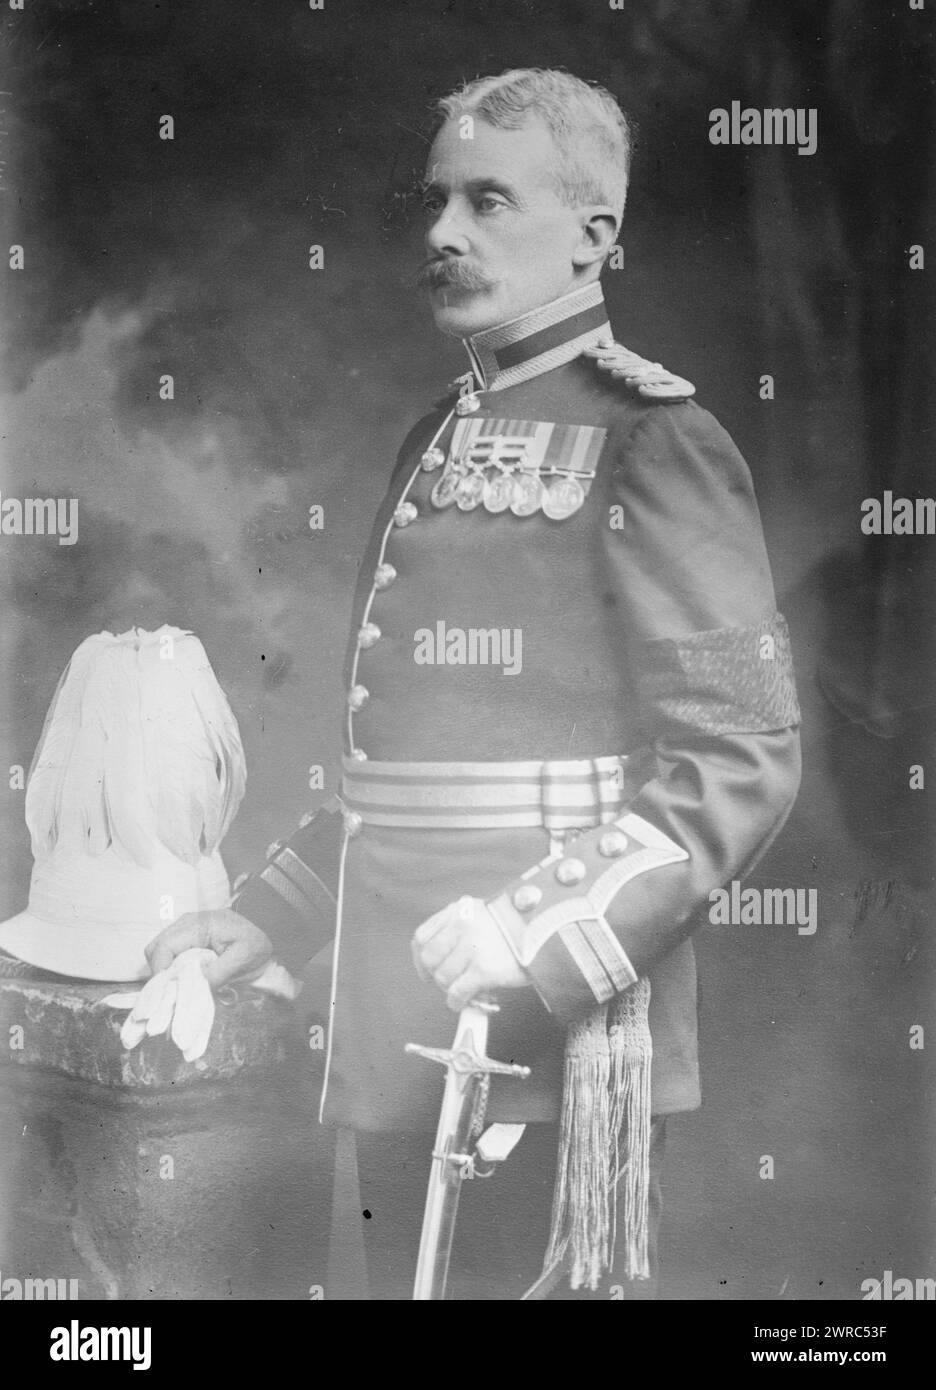 Gen. G.G. Egerton, Photograph shows General Granville George Egerton (1859-1951) who served in the British Army during conflicts including the Afghan War of 1879-80 and World War I., between ca. 1915 and ca. 1920, Glass negatives, 1 negative: glass Stock Photo